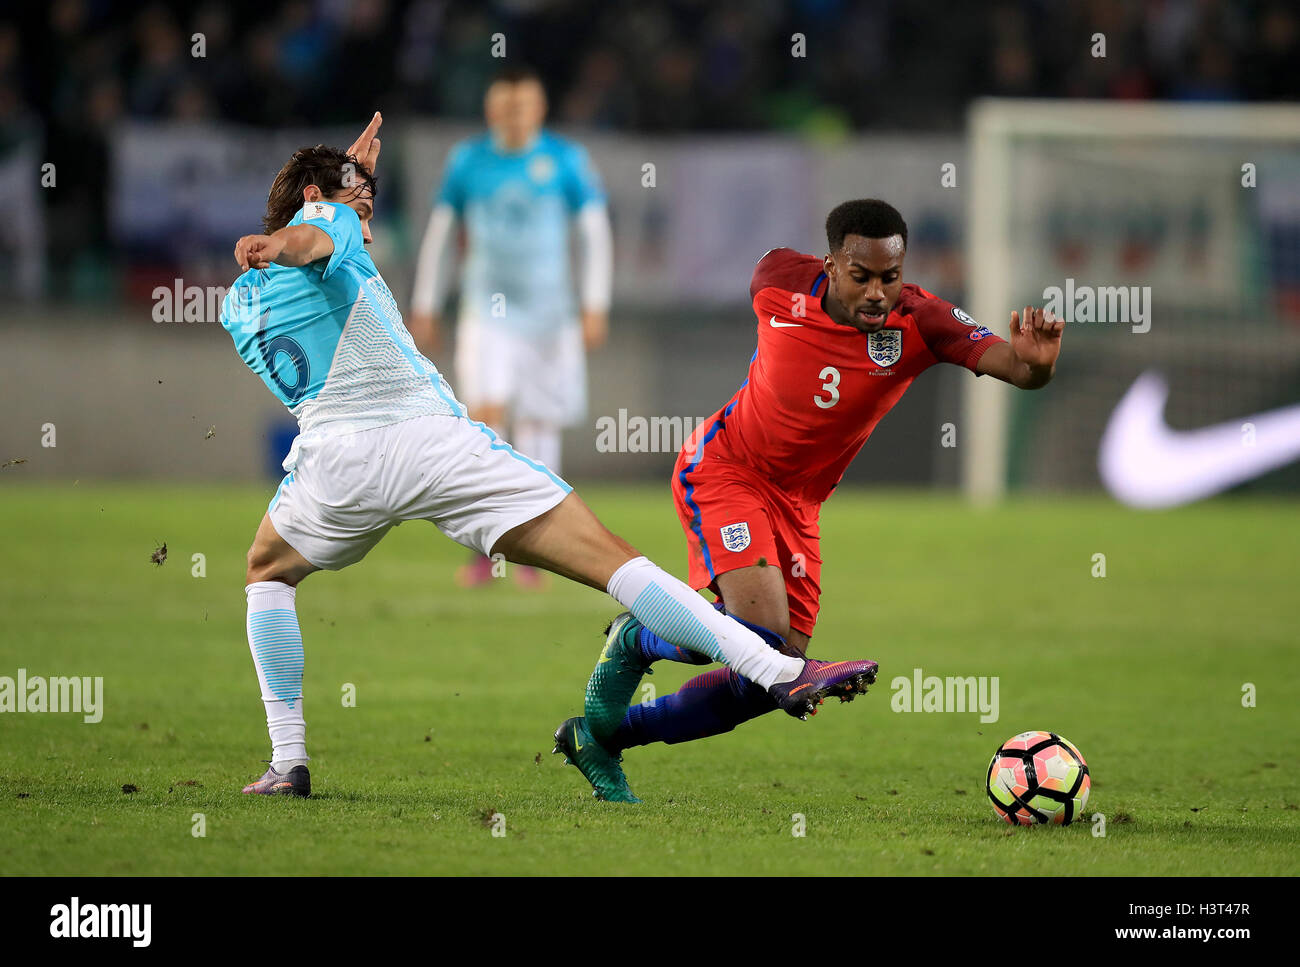 Slovenia's Rene Krhin (left) and England's Danny Rose (right) battle for the ball during the 2018 FIFA World Cup Qualifying match at the Stozice Stadium, Ljubljana. Stock Photo